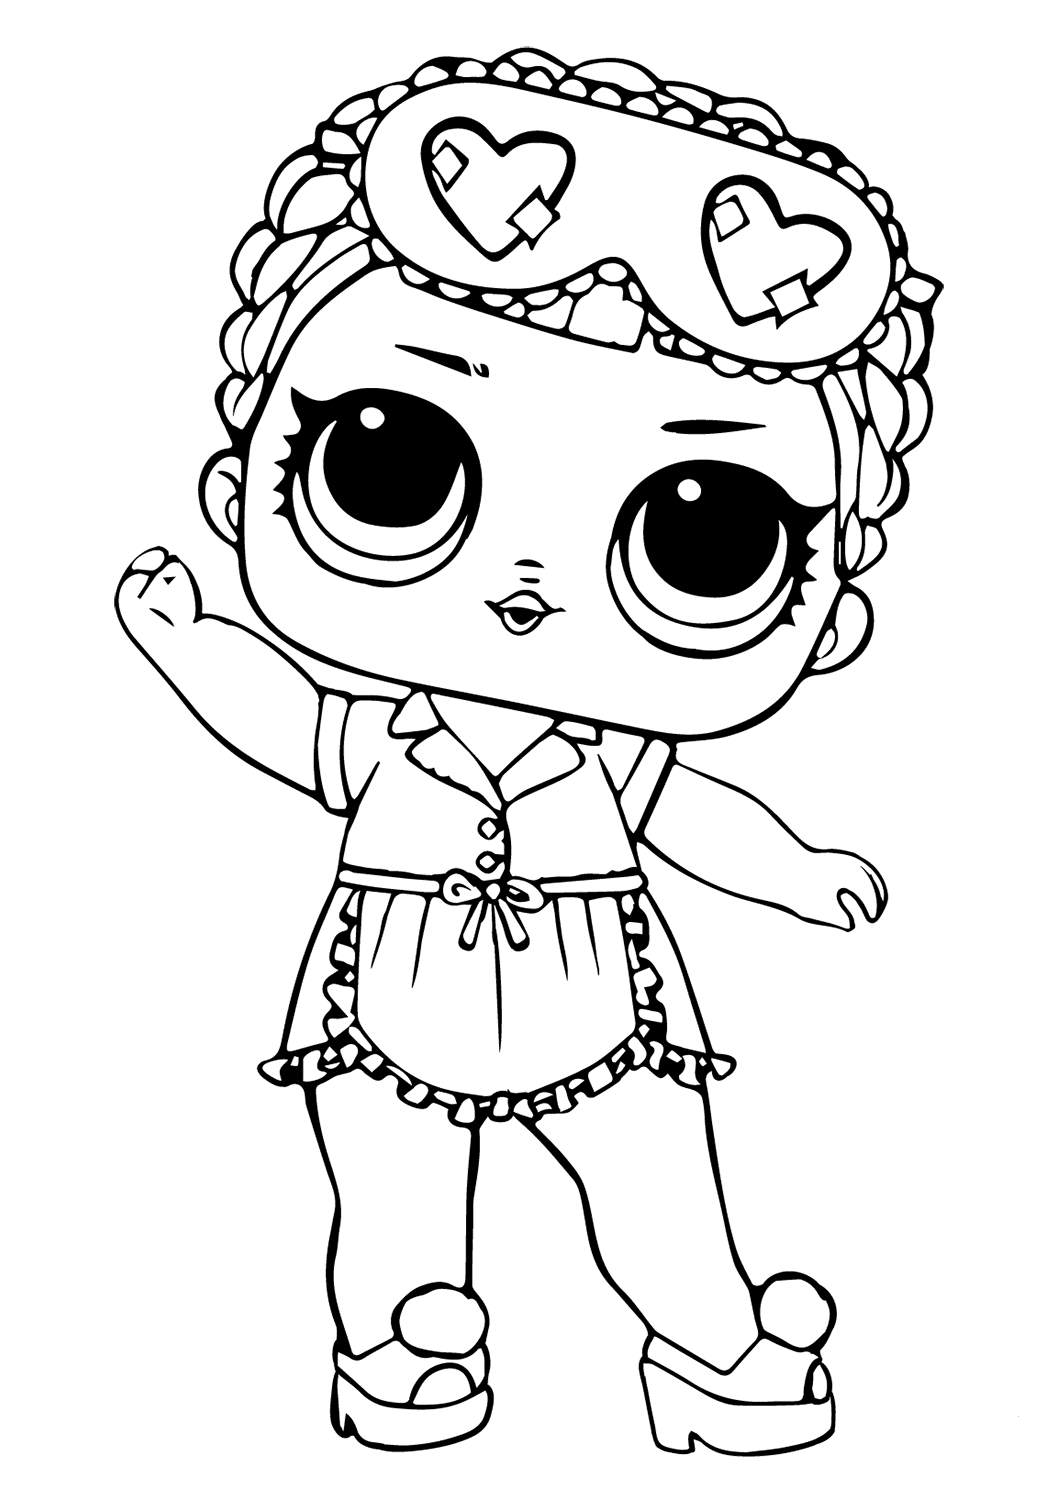 Download Lol Suprise Doll Coloring Pages